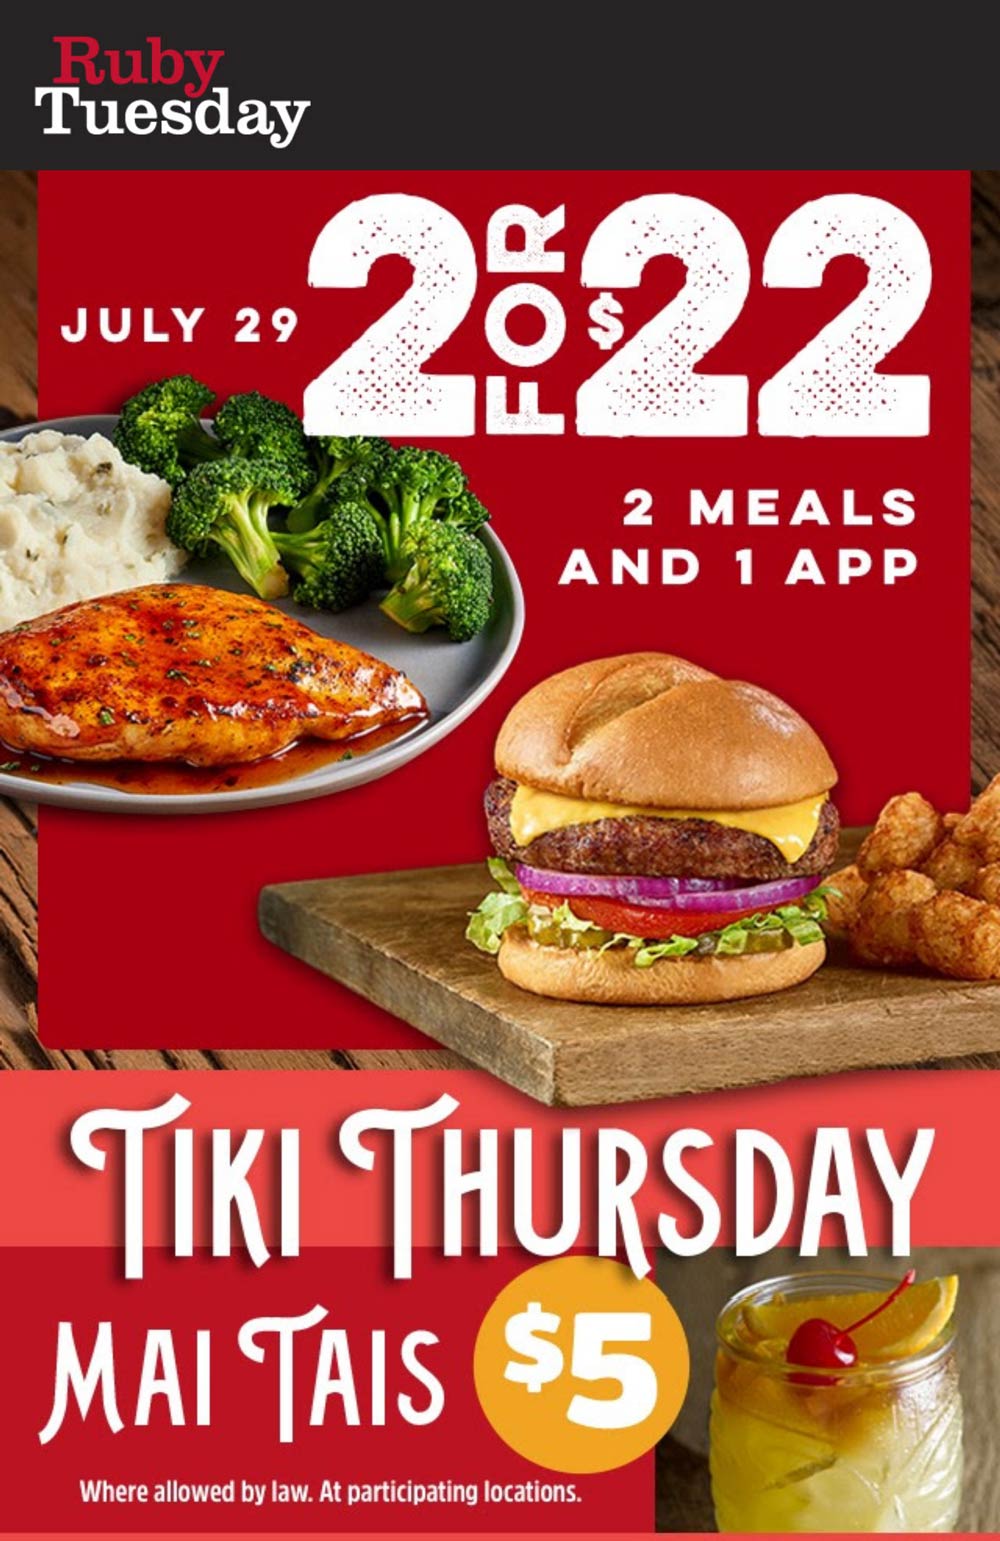 Ruby Tuesday restaurants Coupon  $5 Mai Tais & 2 meals + appetizer = $22 today at Ruby Tuesday #rubytuesday 